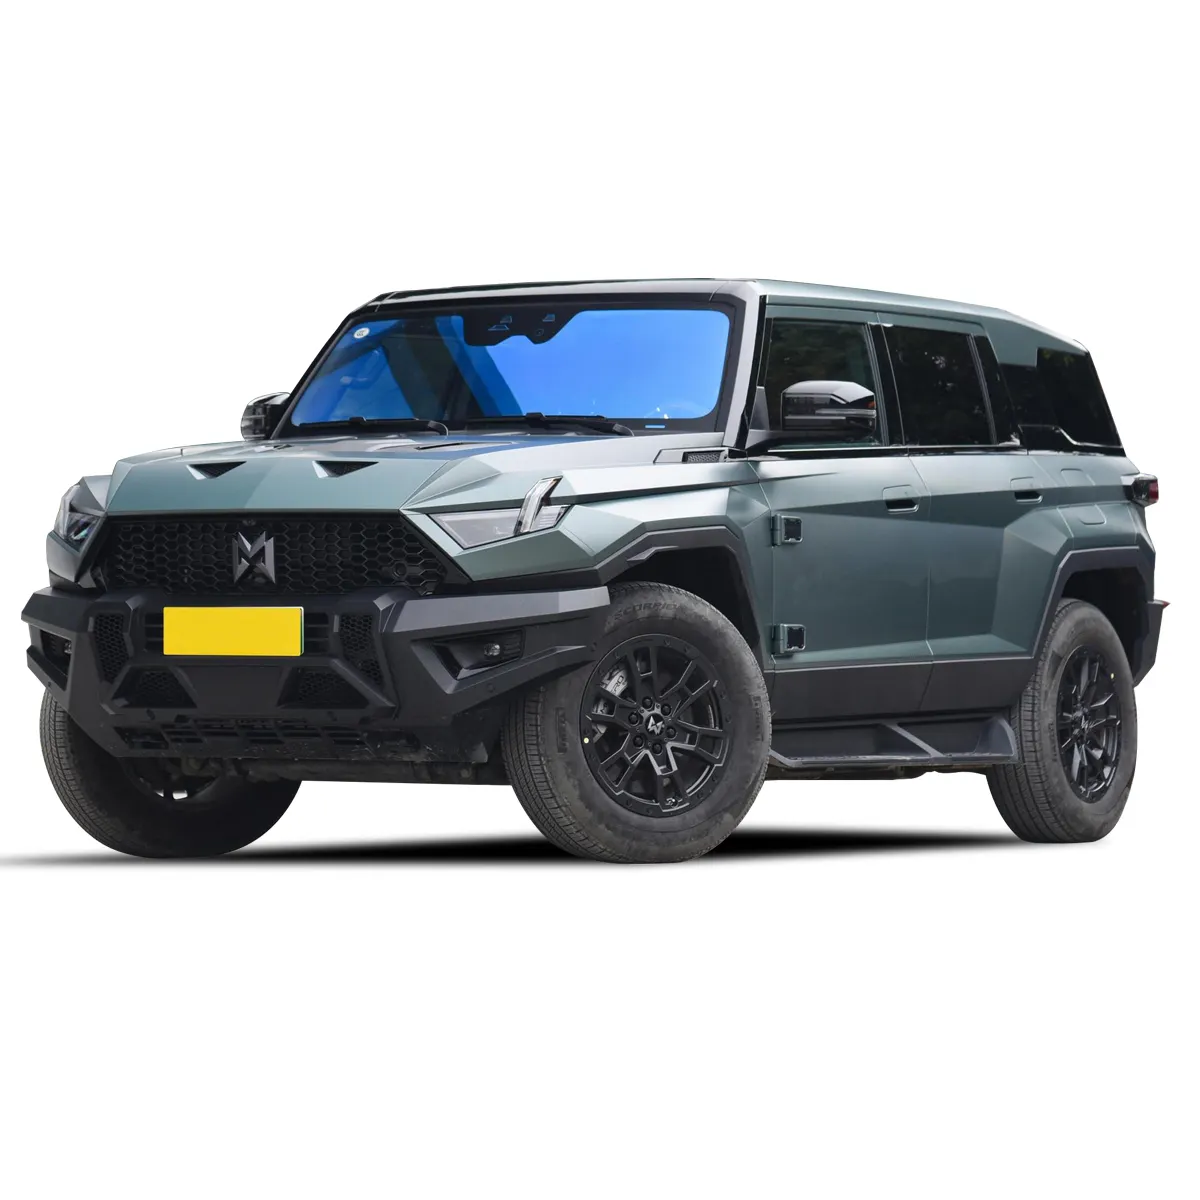 New Dongfeng Mengshi M-Hero Armored Off Road Electric Vehicle Hybrid Suv 4X4 Dong Feng MHero 1 917 Car For Sale